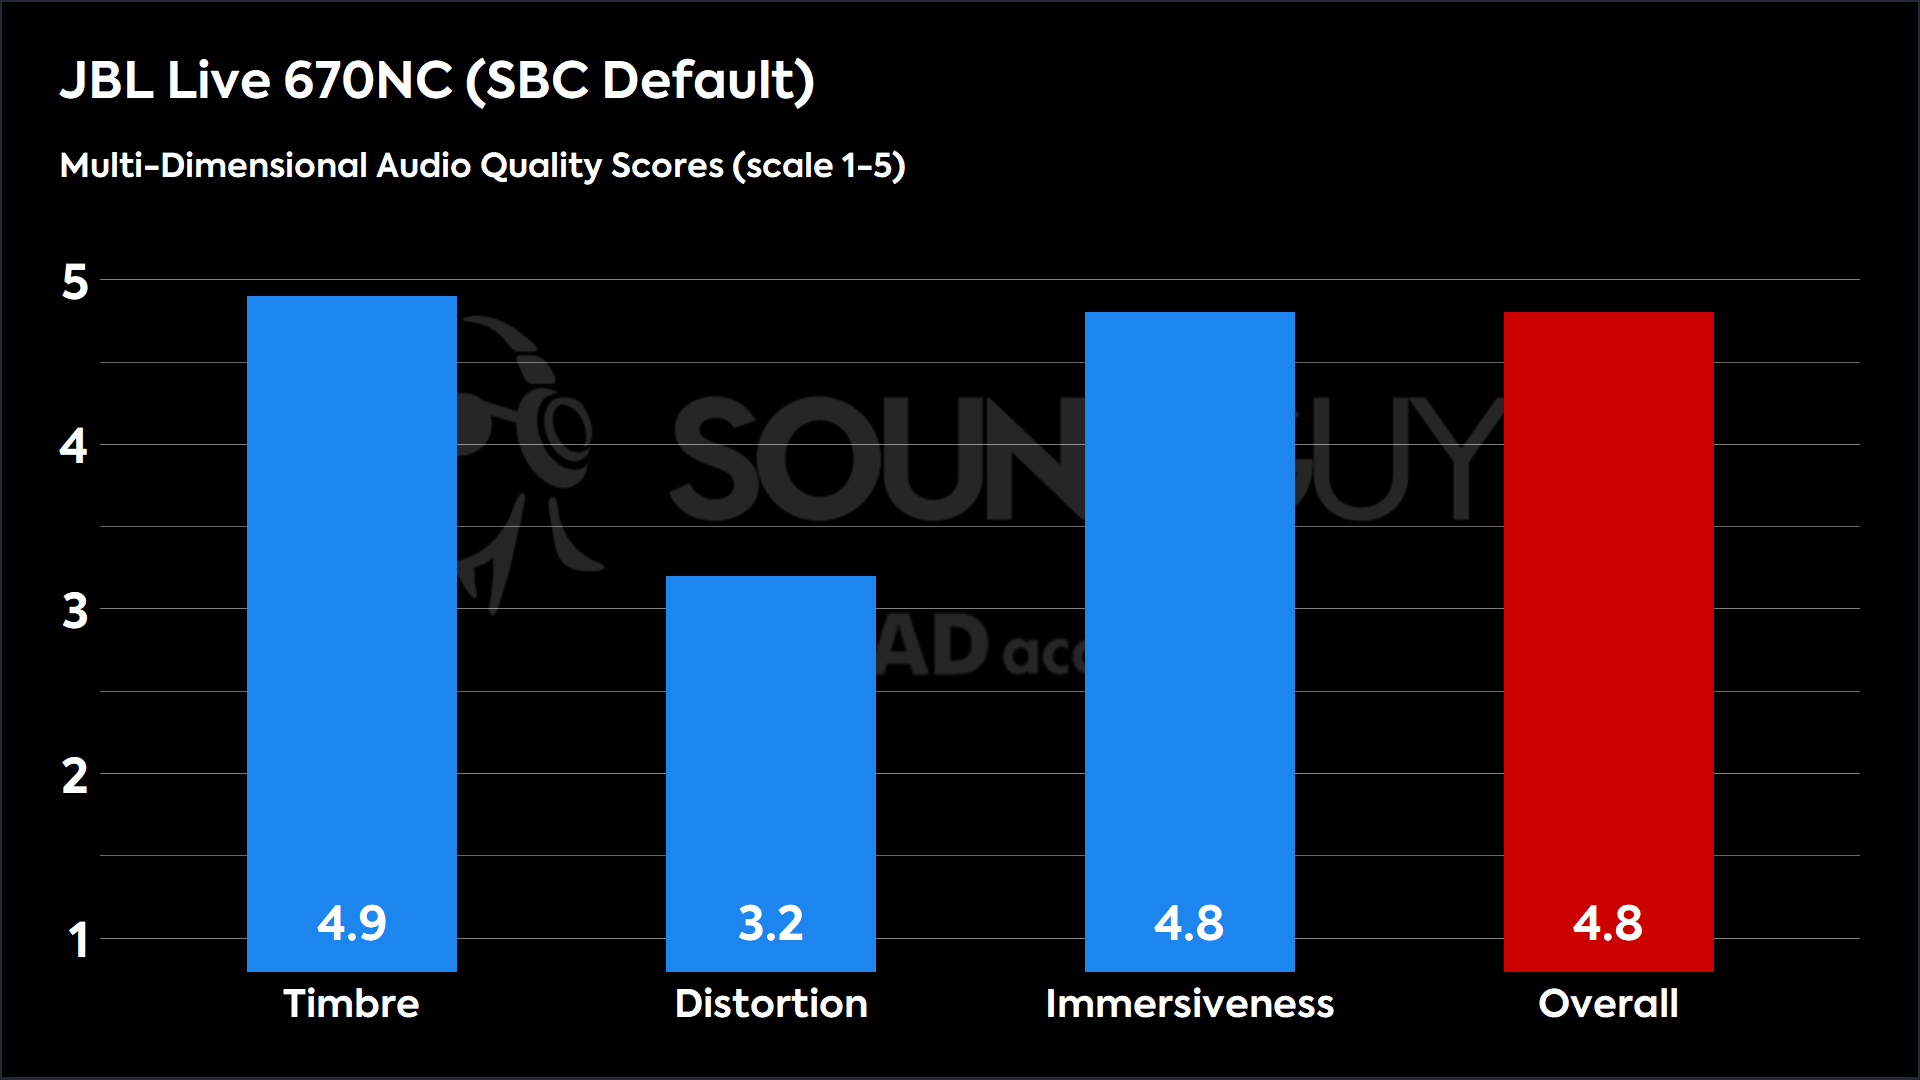 This chart shows the MDAQS results for the JBL Live 670NC in SBC Default mode. The Timbre score is 4.9, The Distortion score is 3.2, the Immersiveness score is 4.8, and the Overall Score is 4.8).